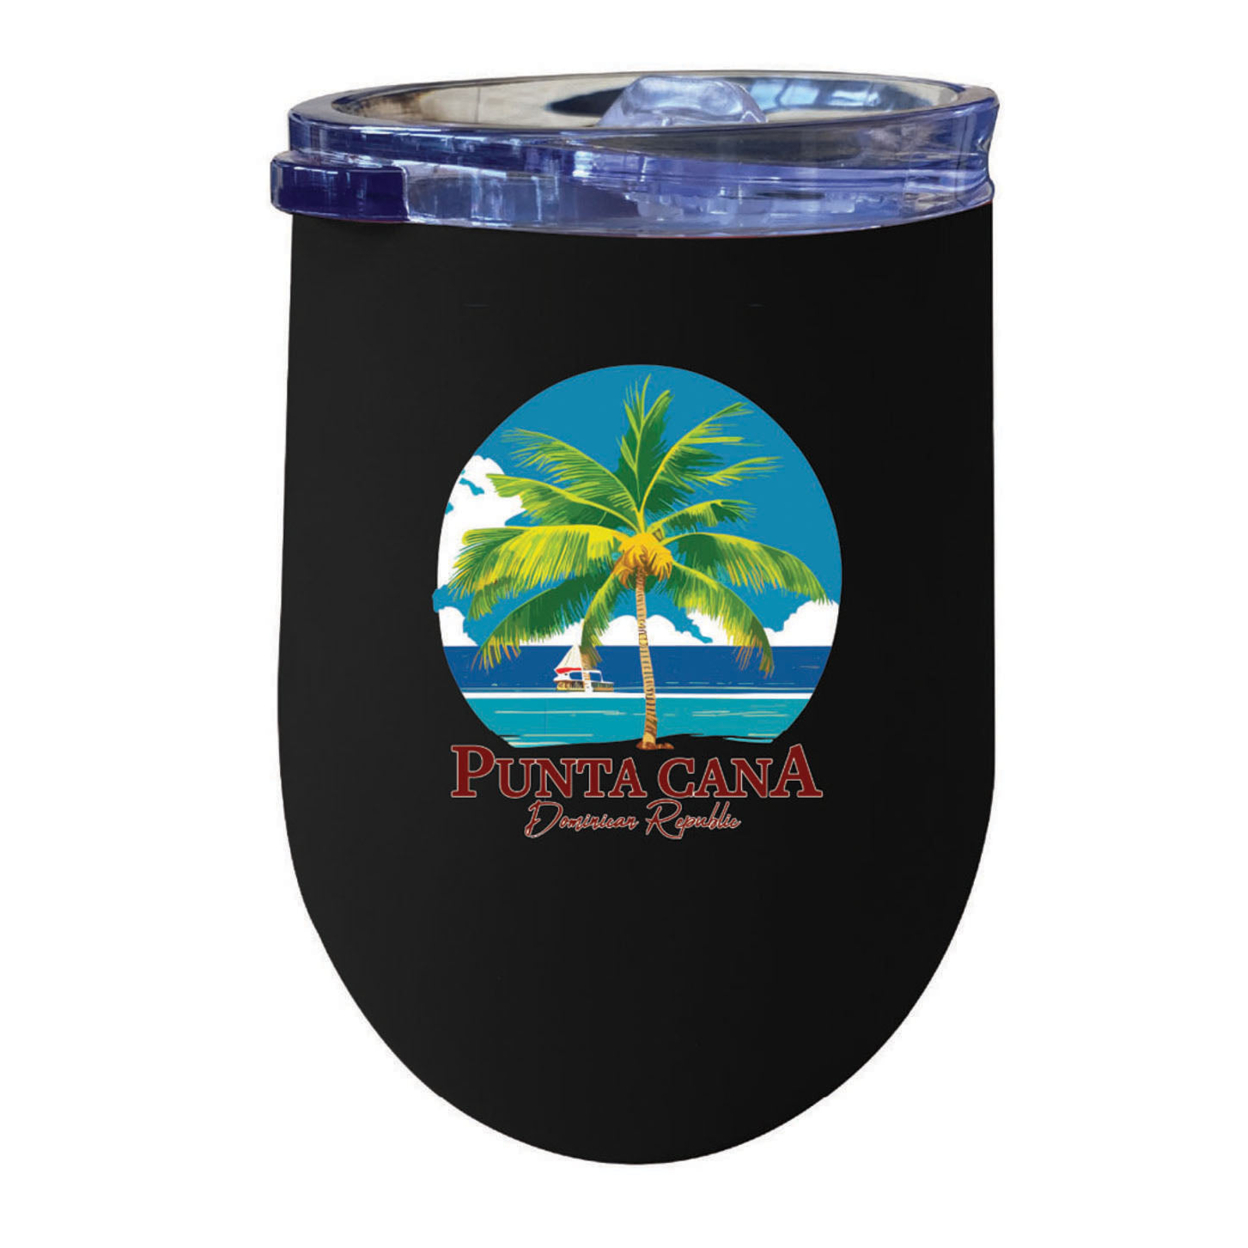 Punta Cana Dominican Republic Souvenir 12 Oz Insulated Wine Stainless Steel Tumbler - White, PARROT B